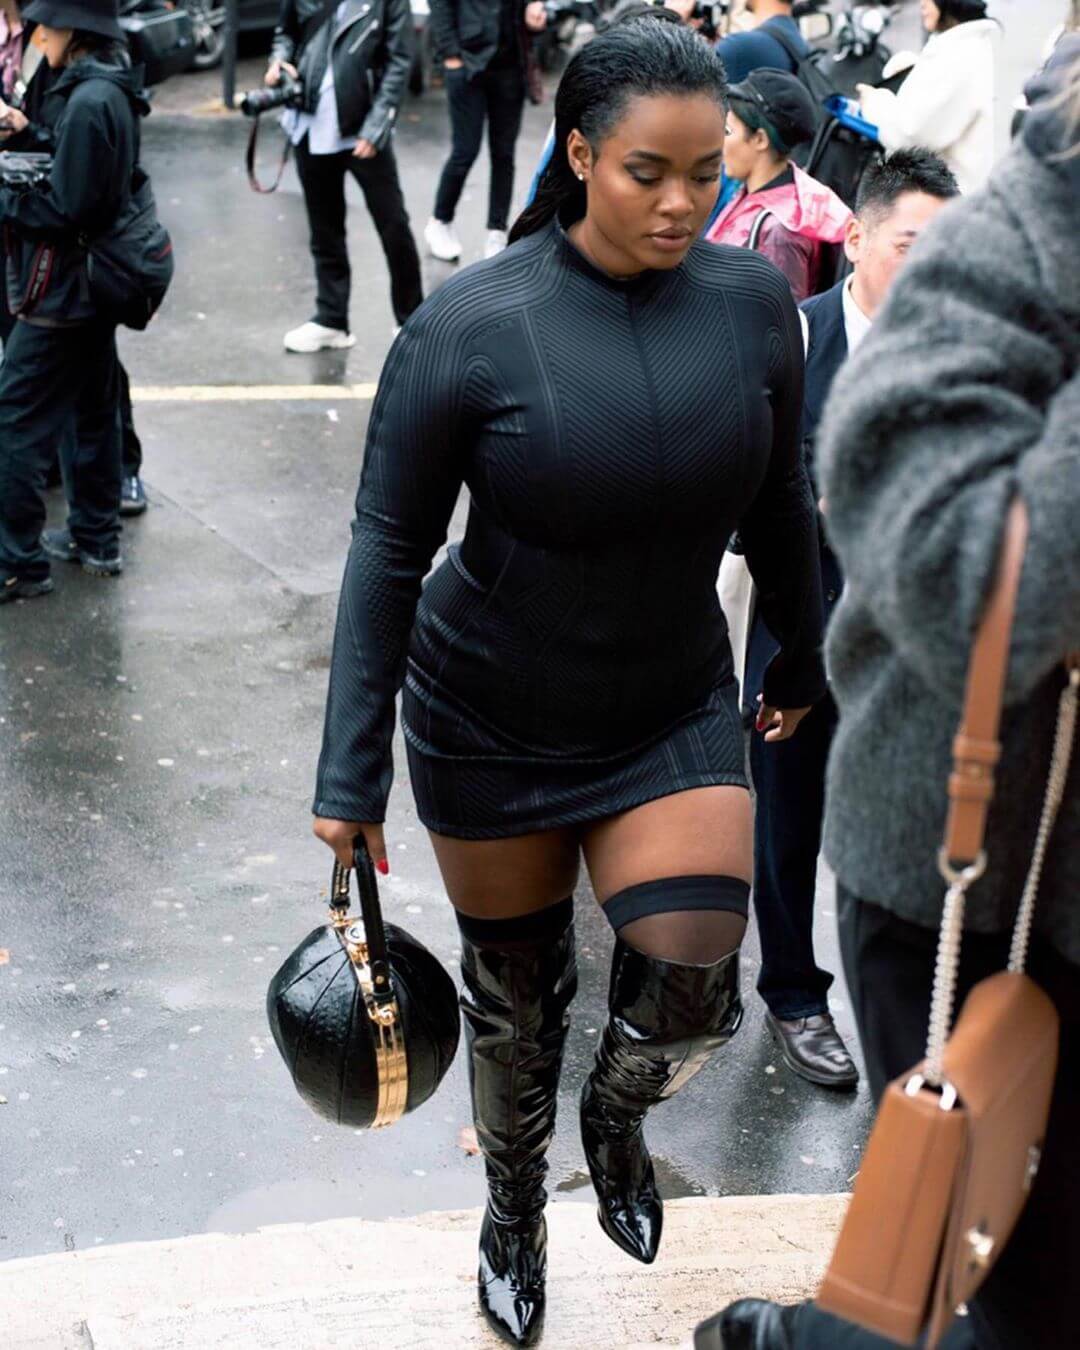 Woman walking up stairs wearing tight black body dress and high black boots for Mugler